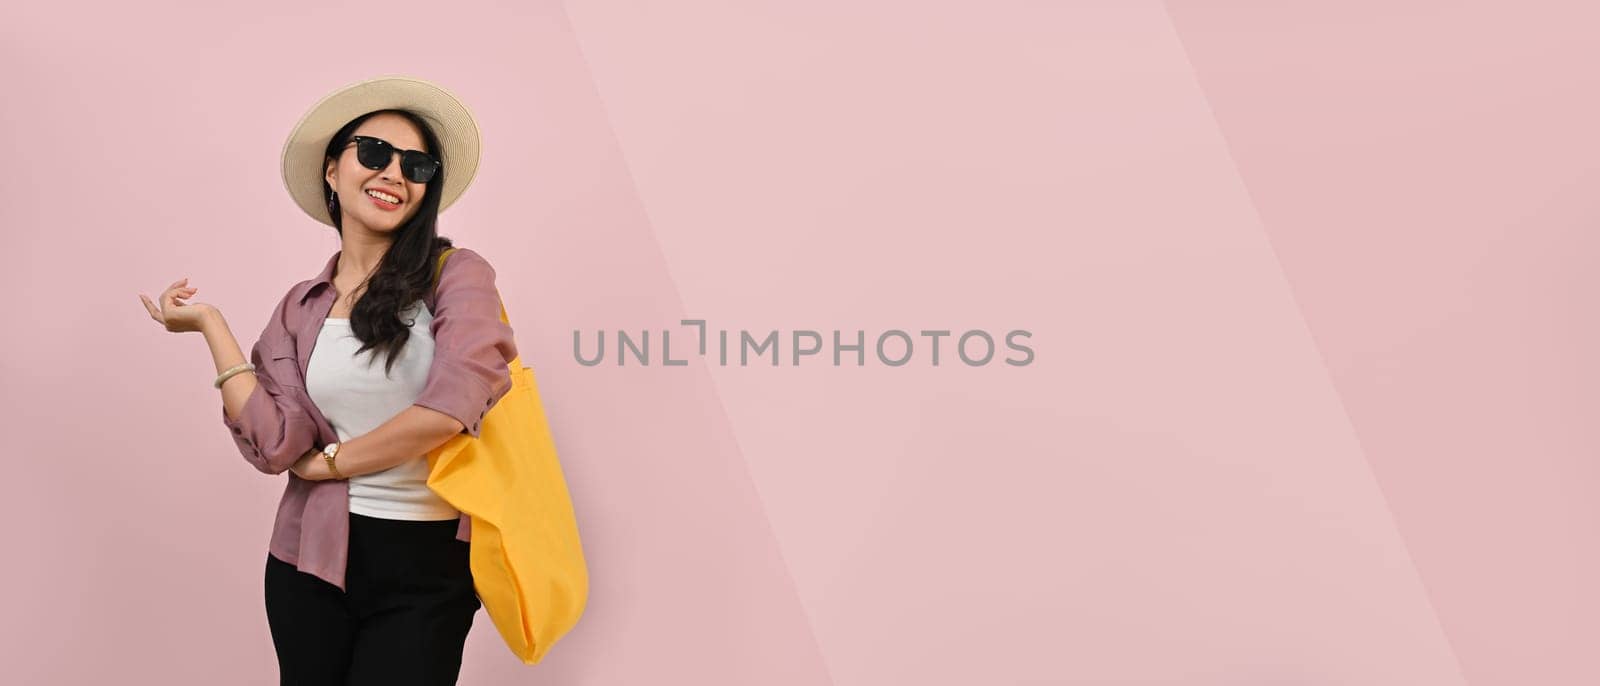 Confident woman wearing summer clothes and sunglasses isolated on pink background with copy space for graphic design.